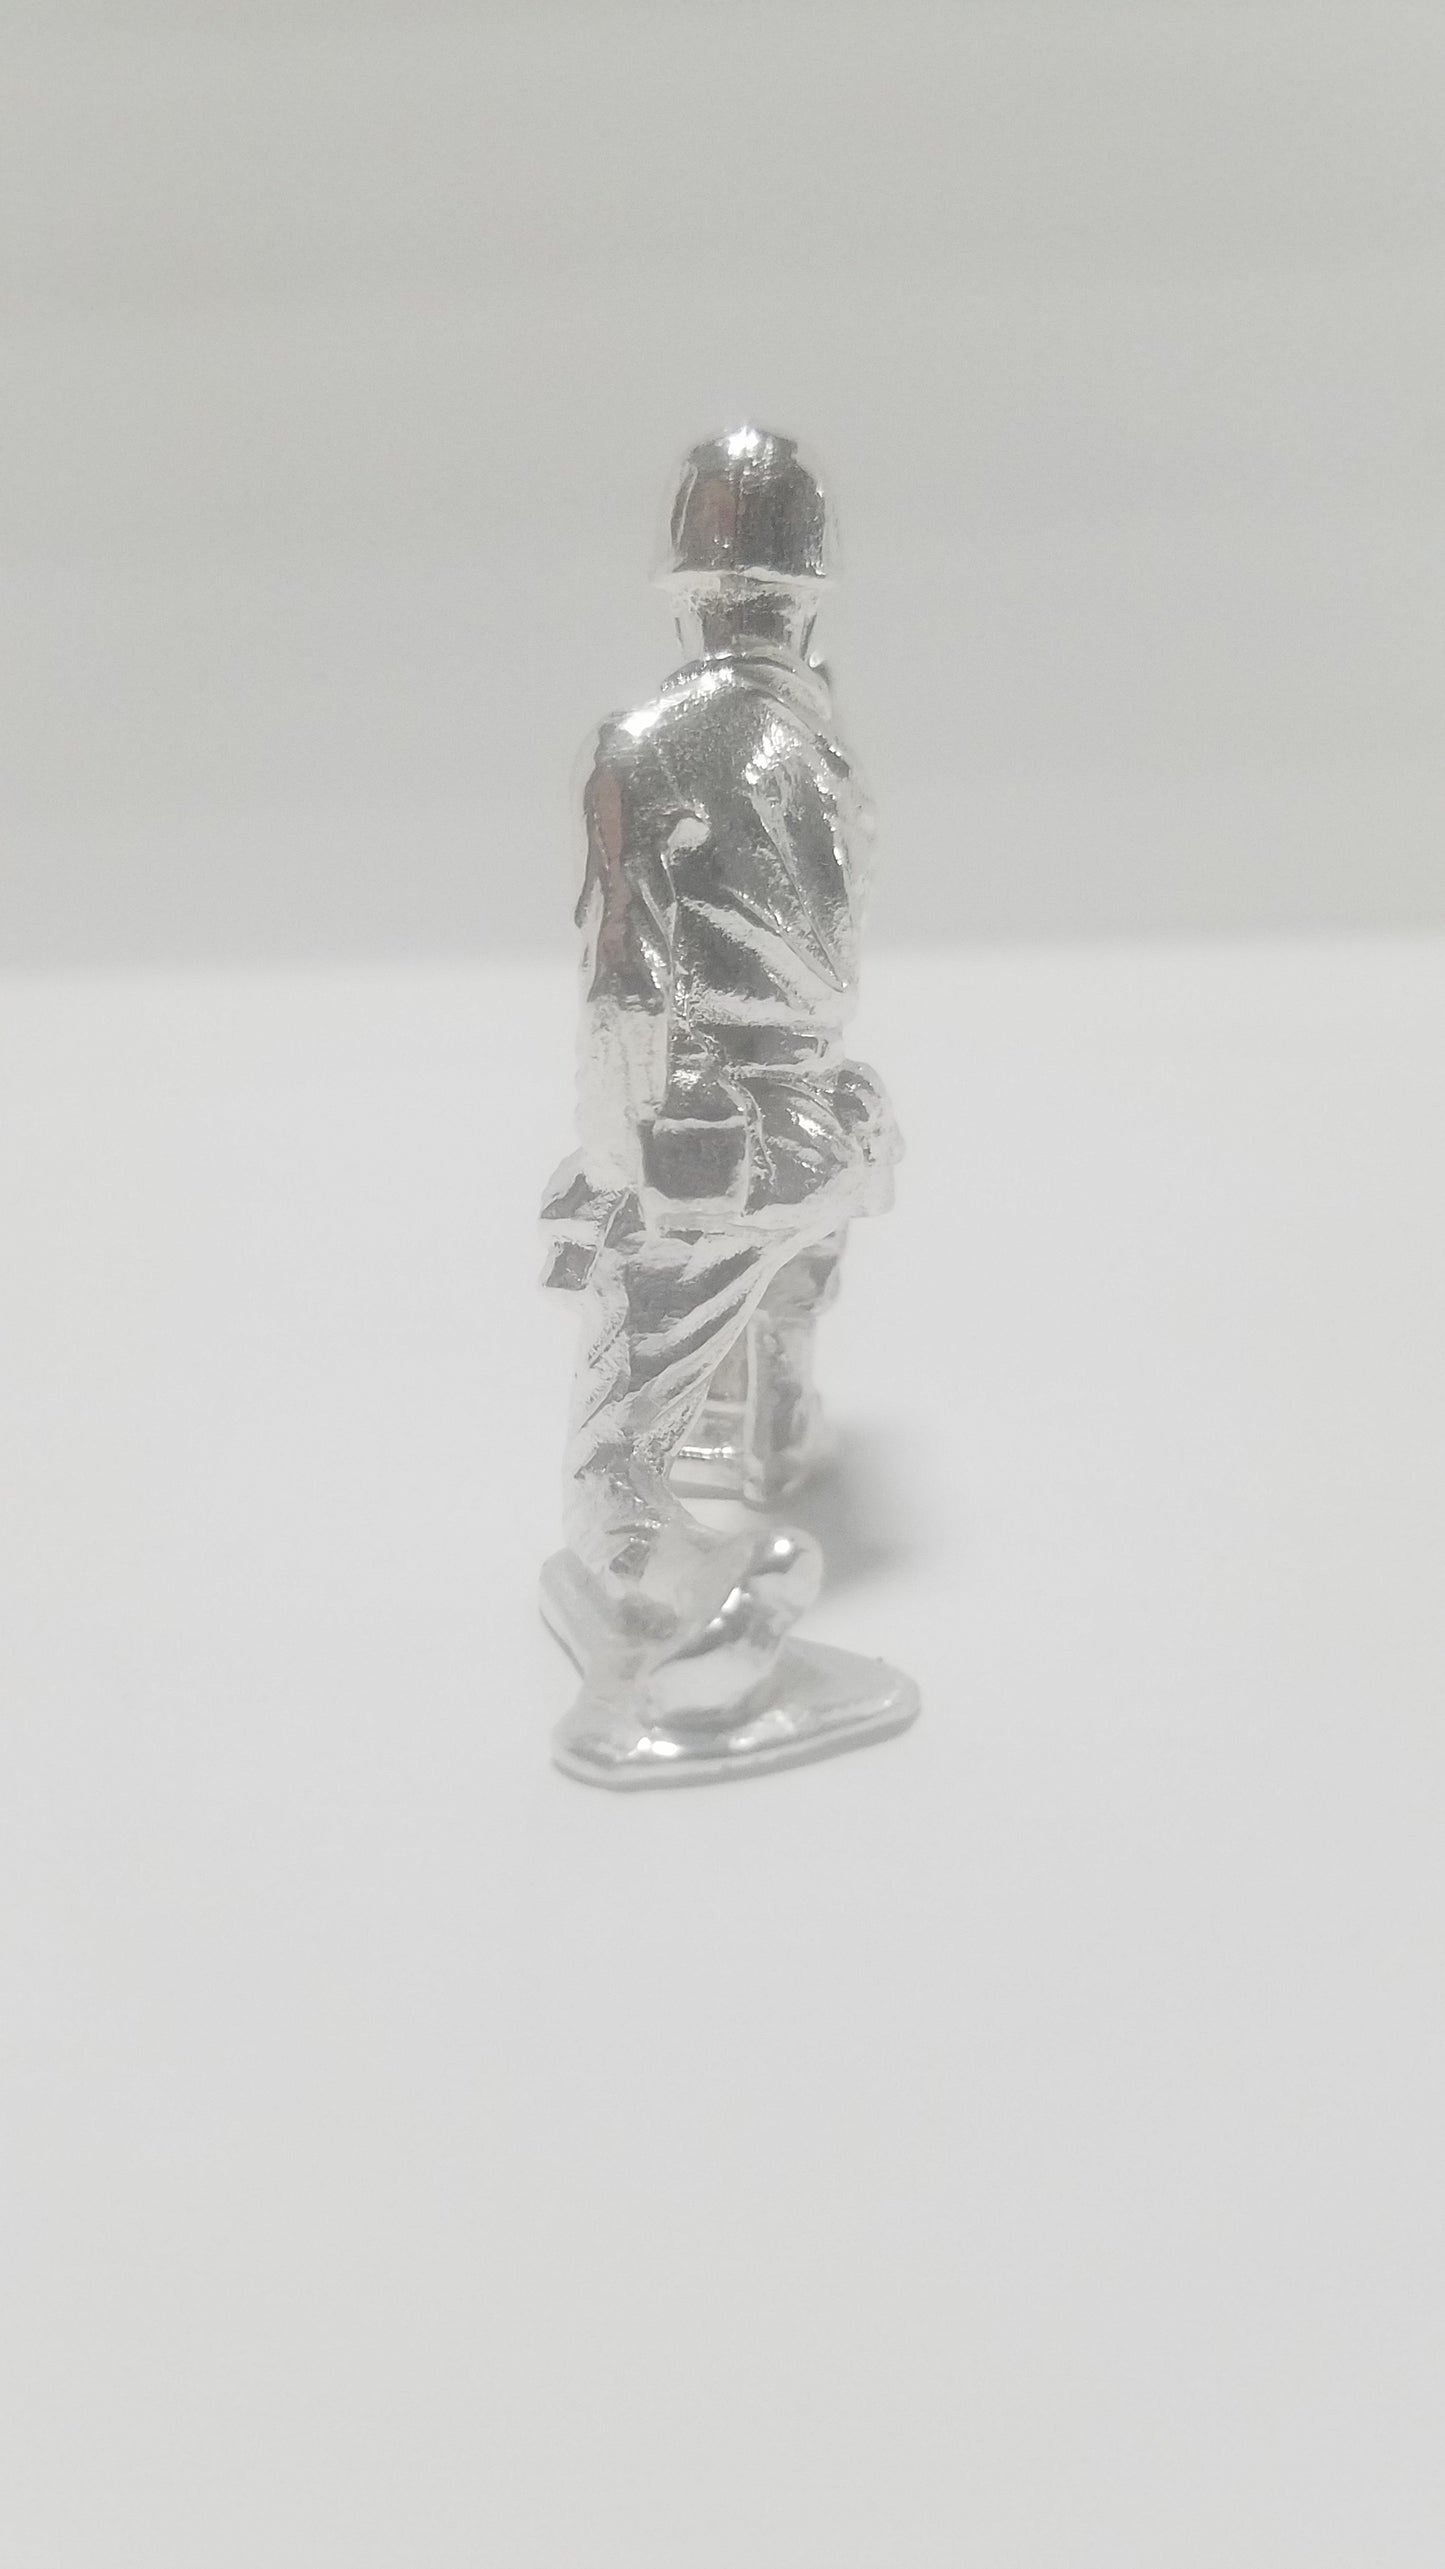 Classic Army Man Mortar Silver Toy Soldier .999 Fine Silver